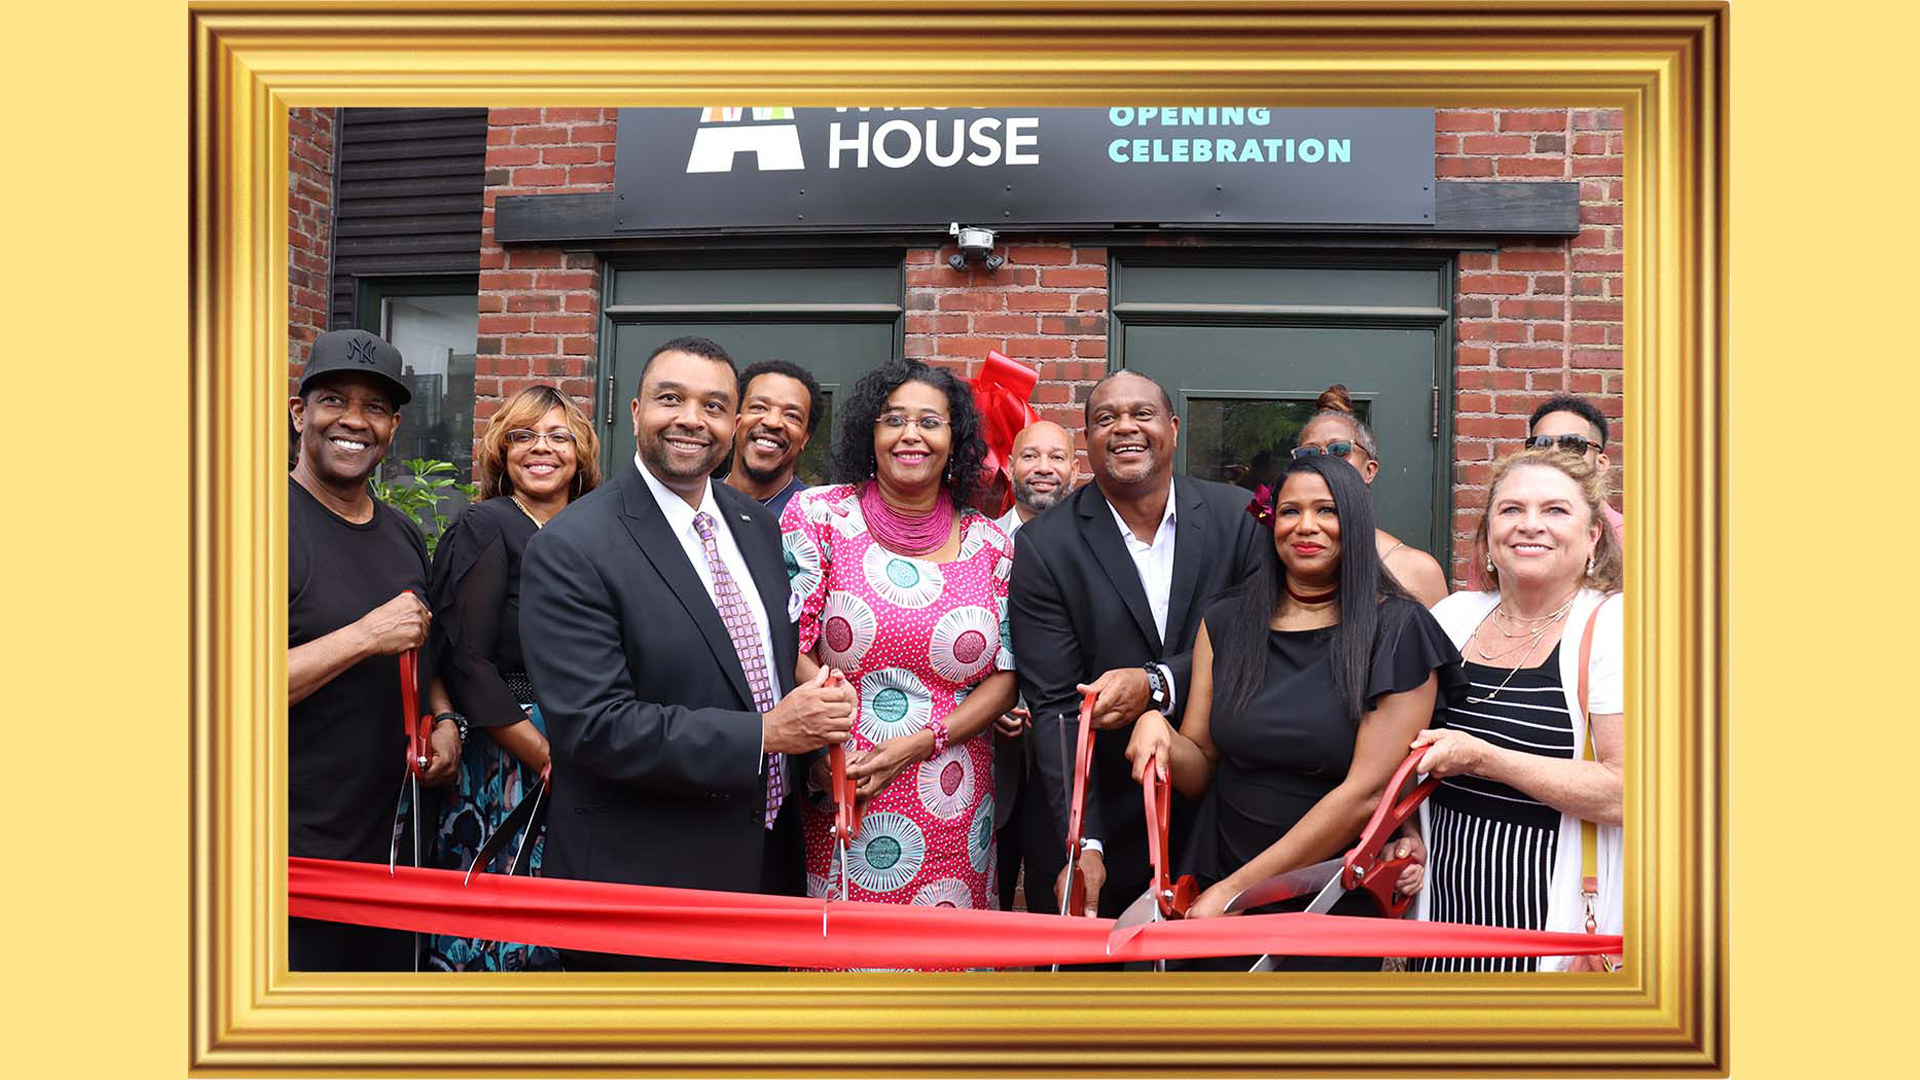 August Wilson House opens to much fanfare